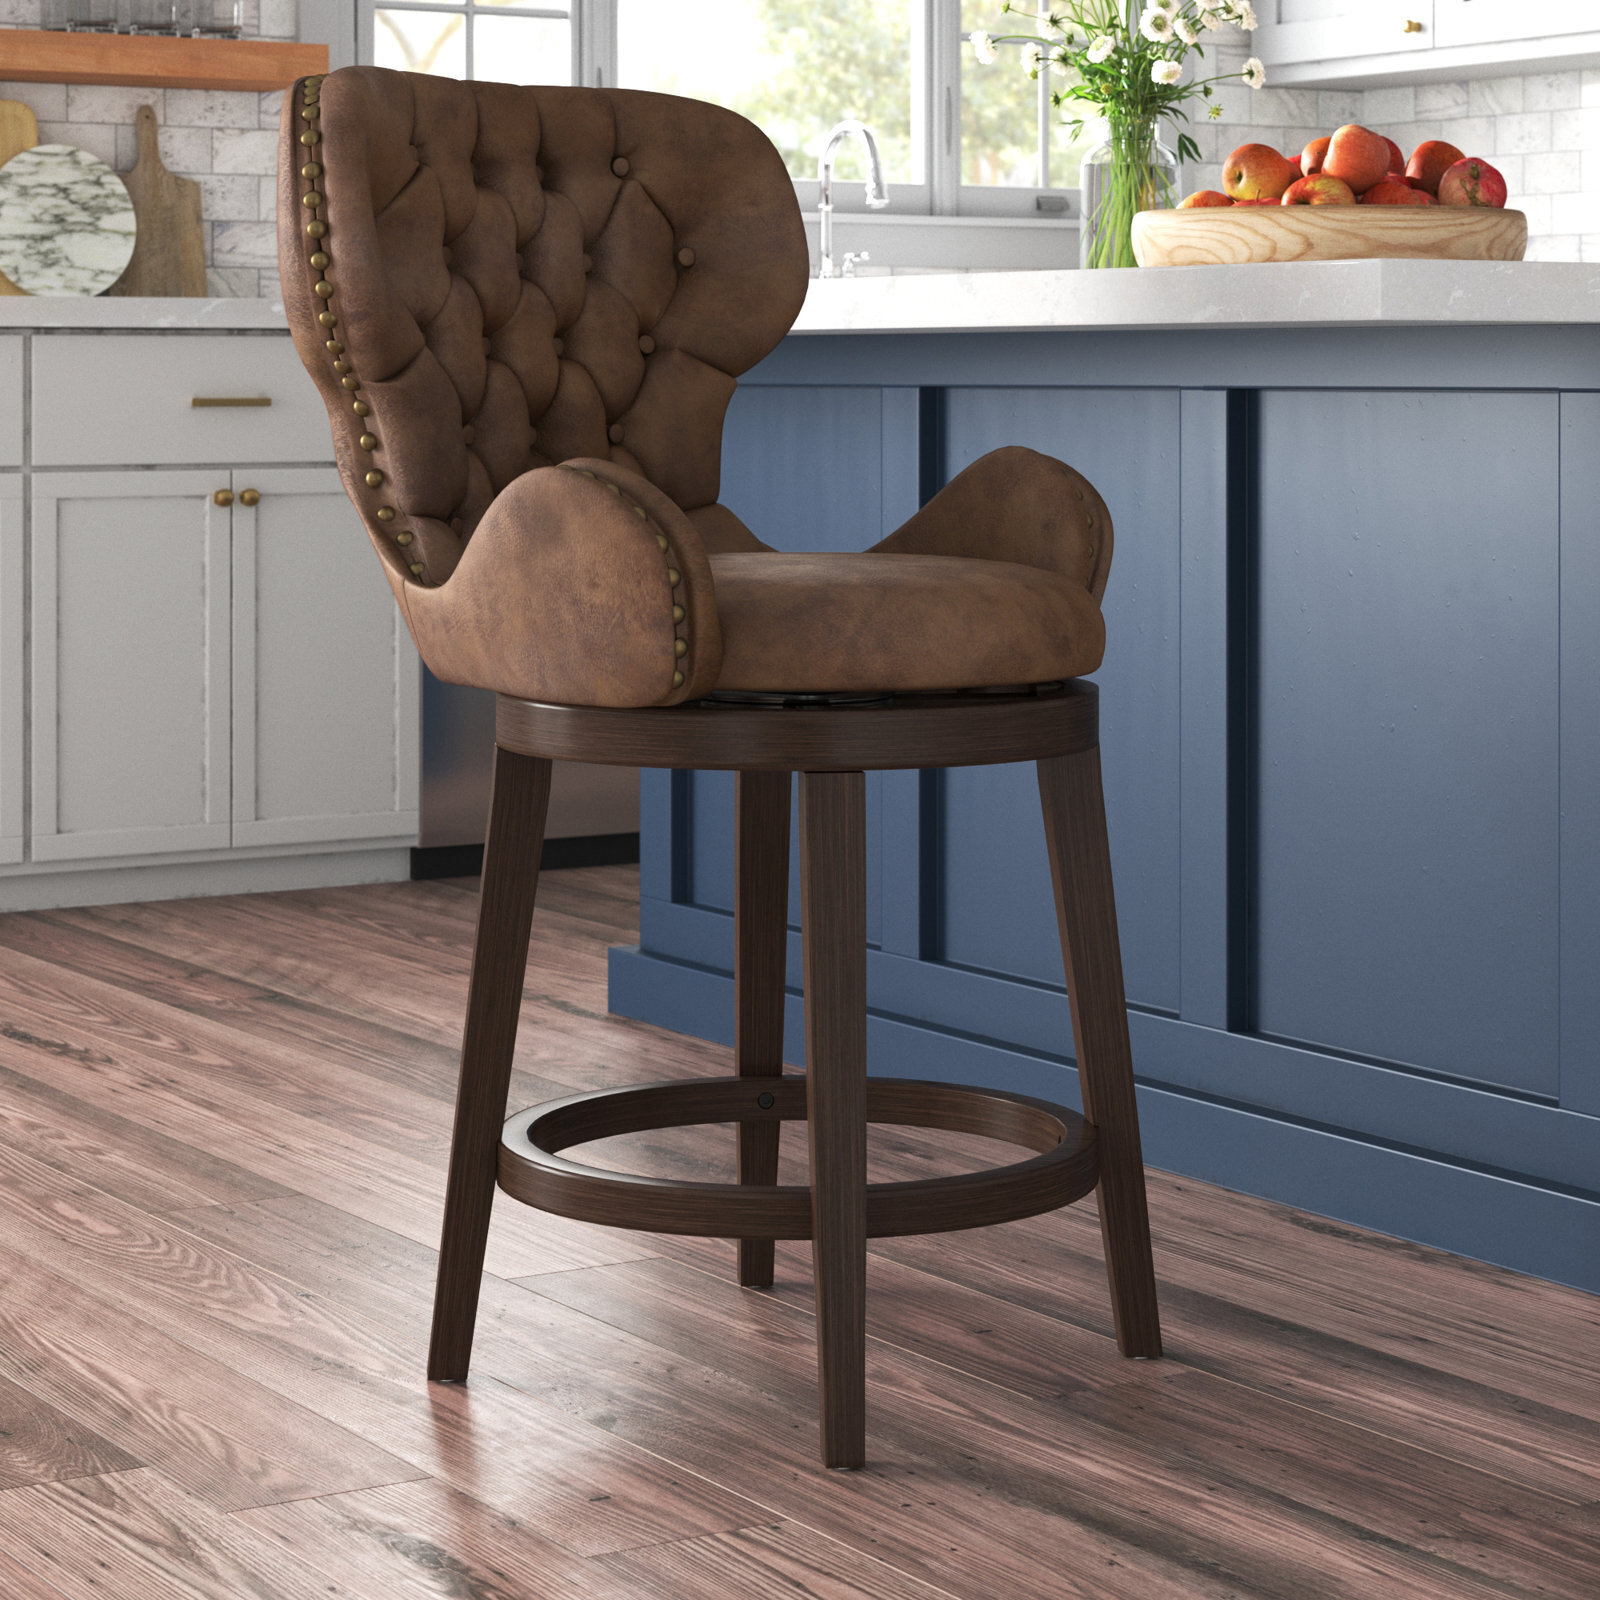 Swivel Wooden Bar Stool With Wing Back